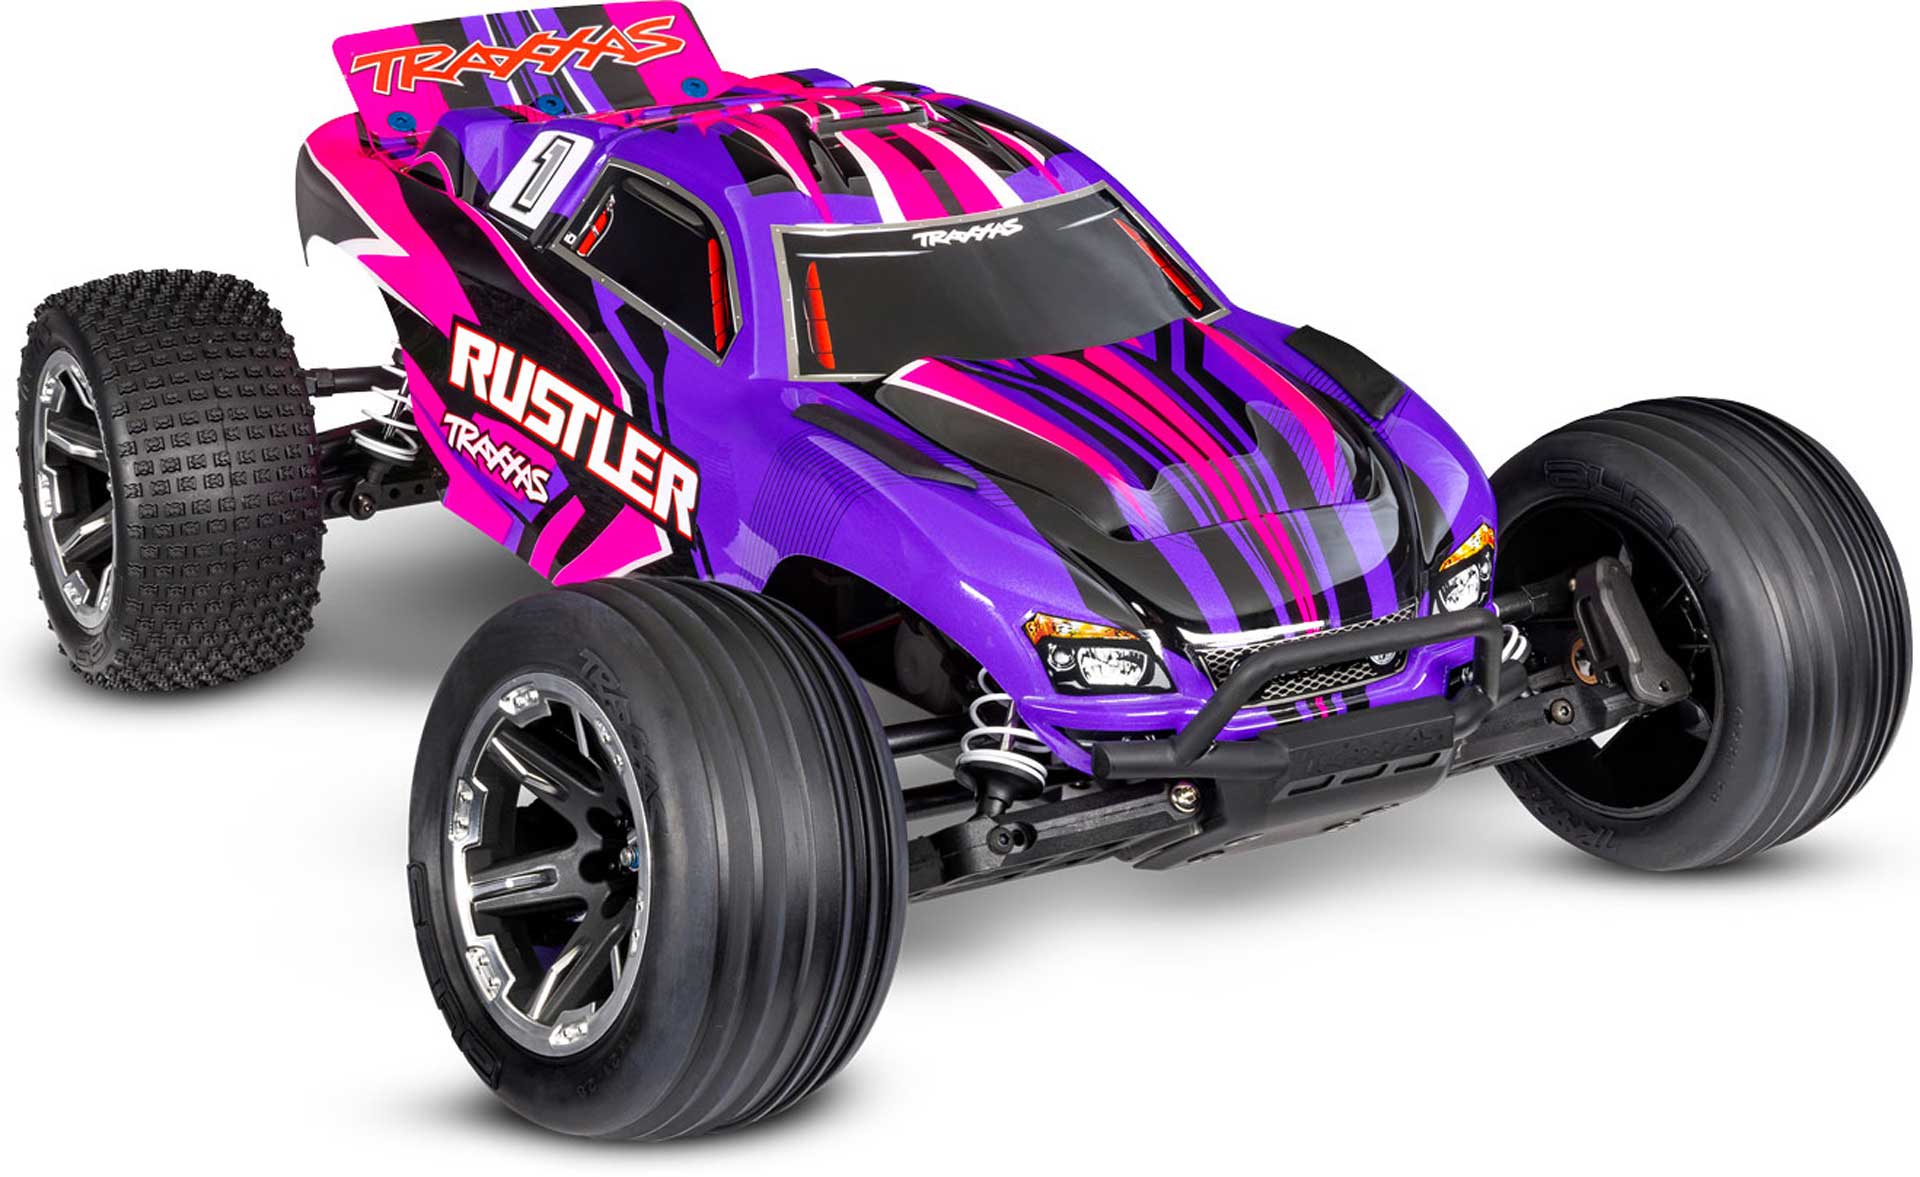 TRAXXAS RUSTLER PINK 1/10 2WD STADIUM-TRUCK RTR BRUSHED, HD, WITH BATTERY AND 4AMPER USB